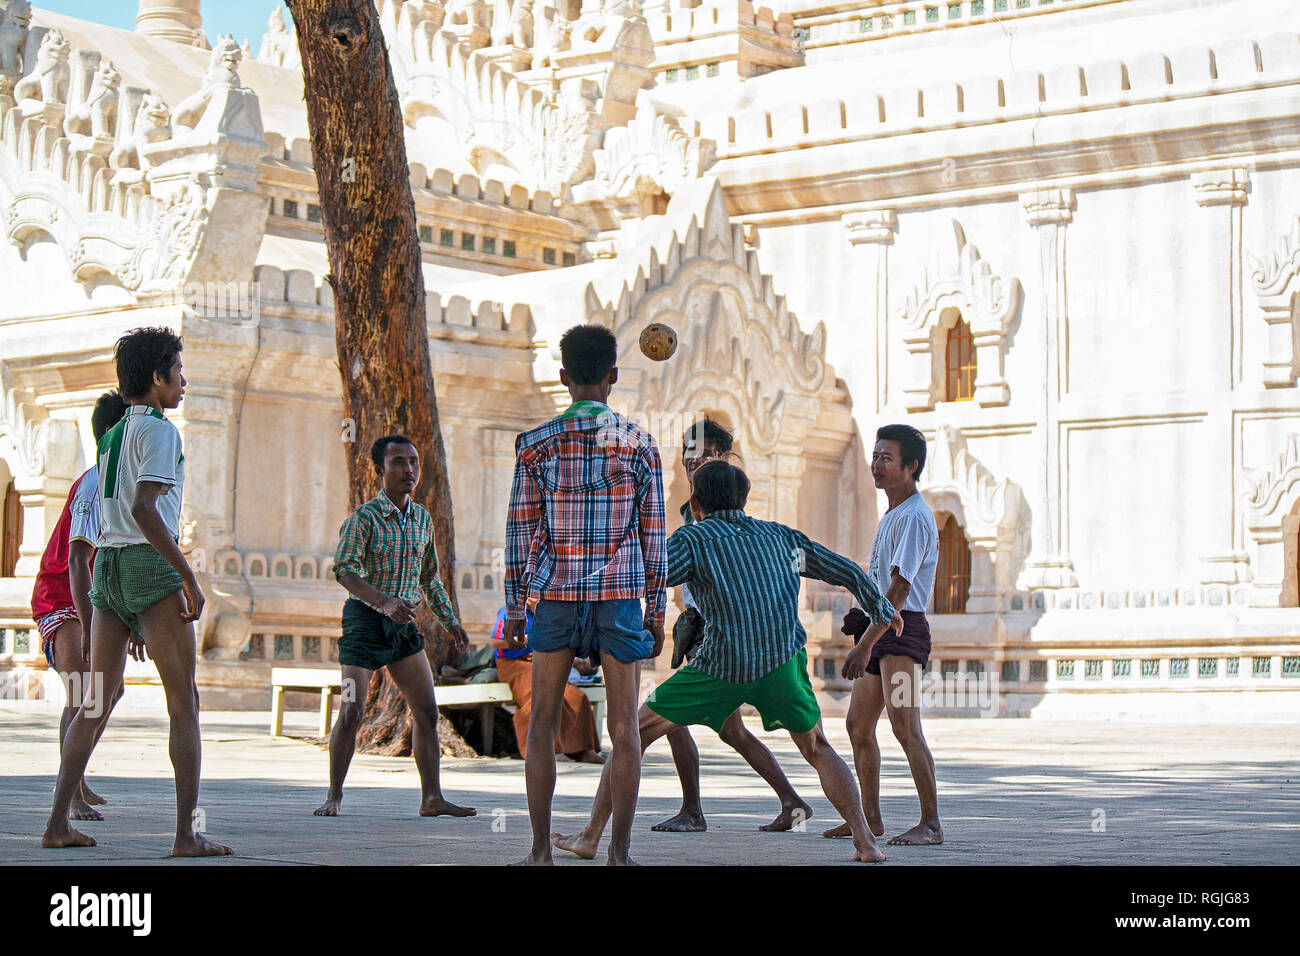 A group of men play Sepak takraw or kick volleyball or Chin Lone as it is known in Myanmar in the court yard of a Bagan temple. Stock Photo